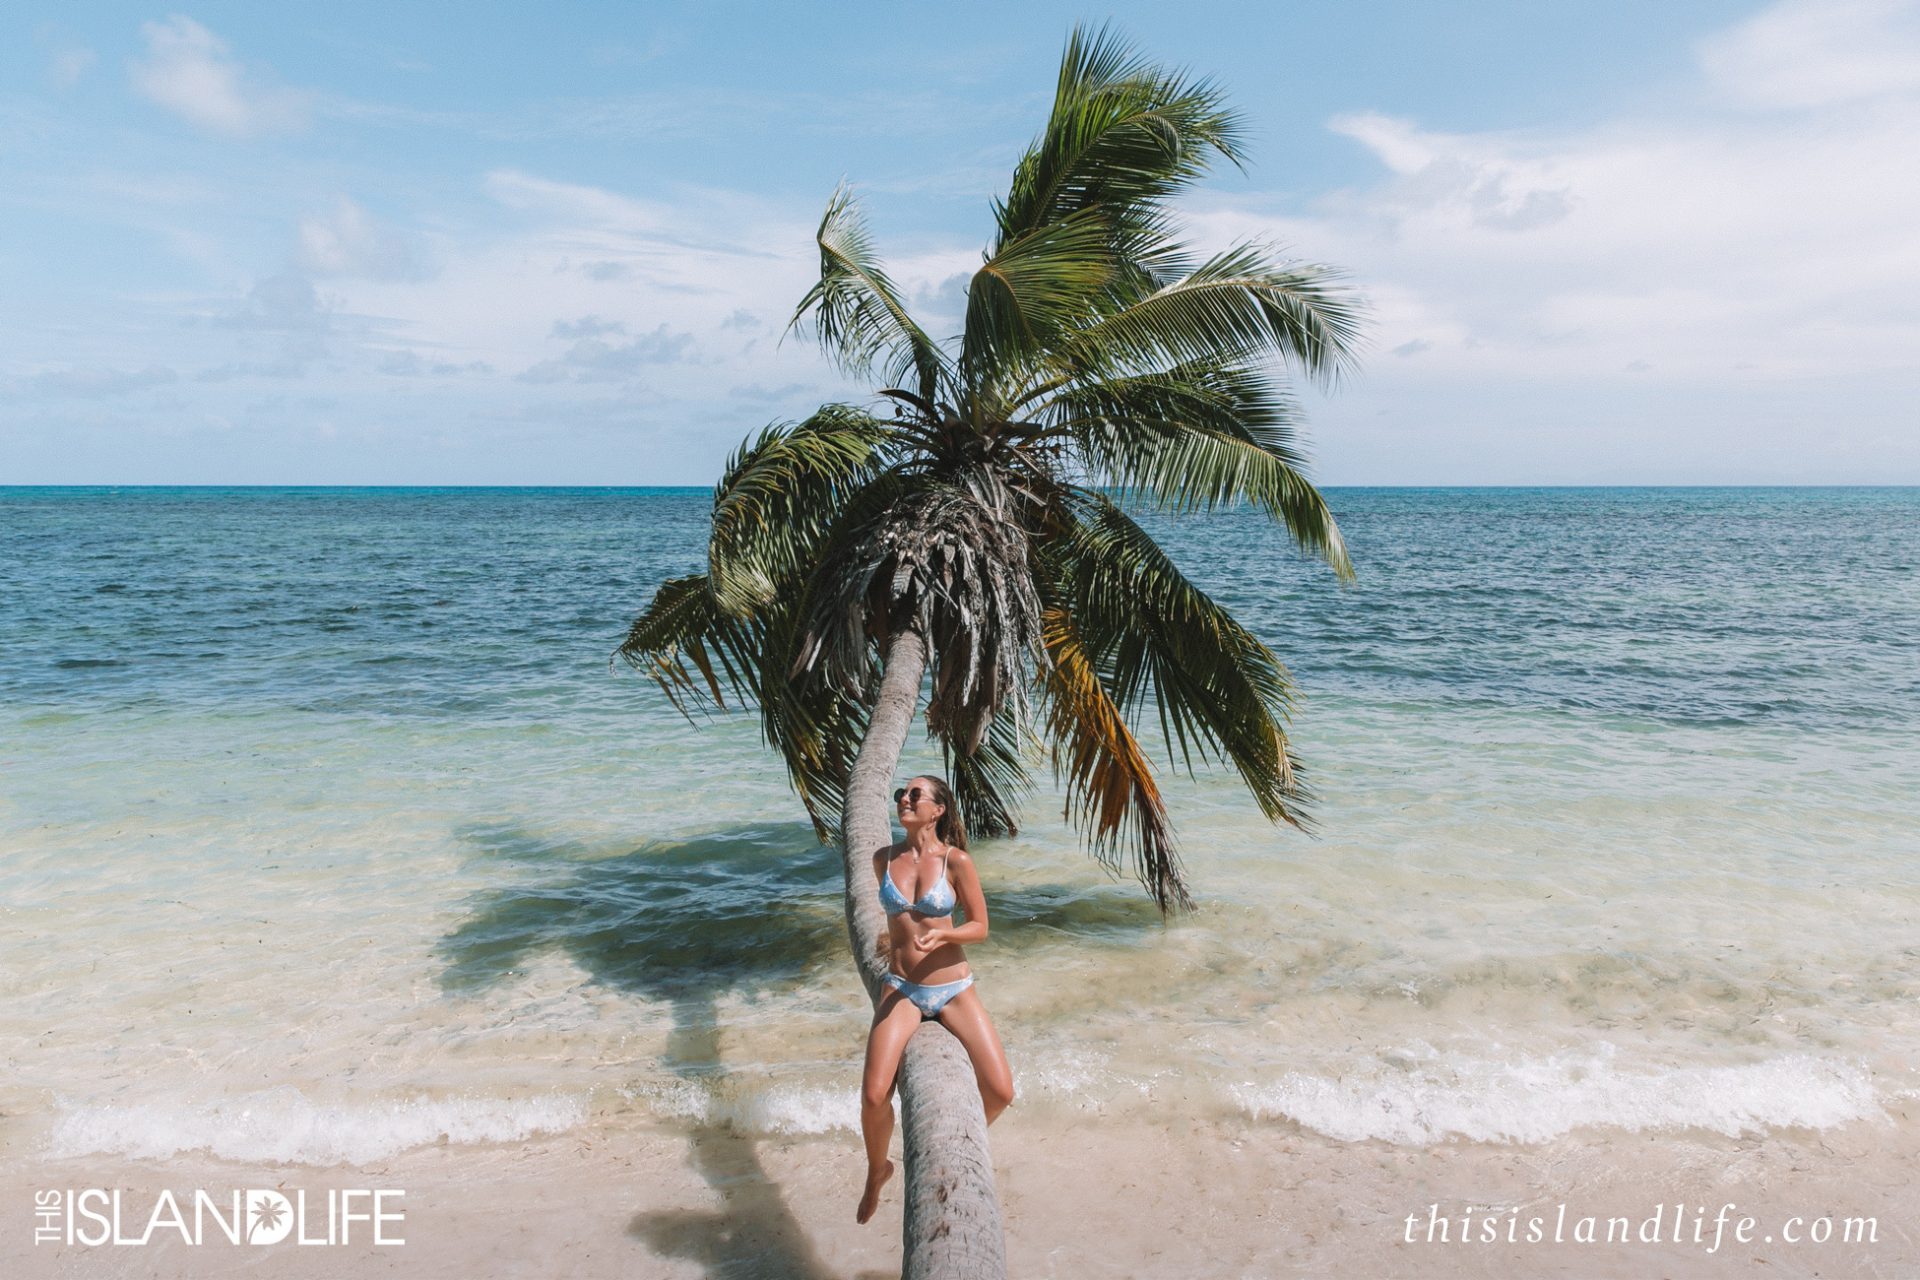 Laura McWhinnie from This Island Life exploring the palm-fringed beaches of Praslin Island in the Seychelles.